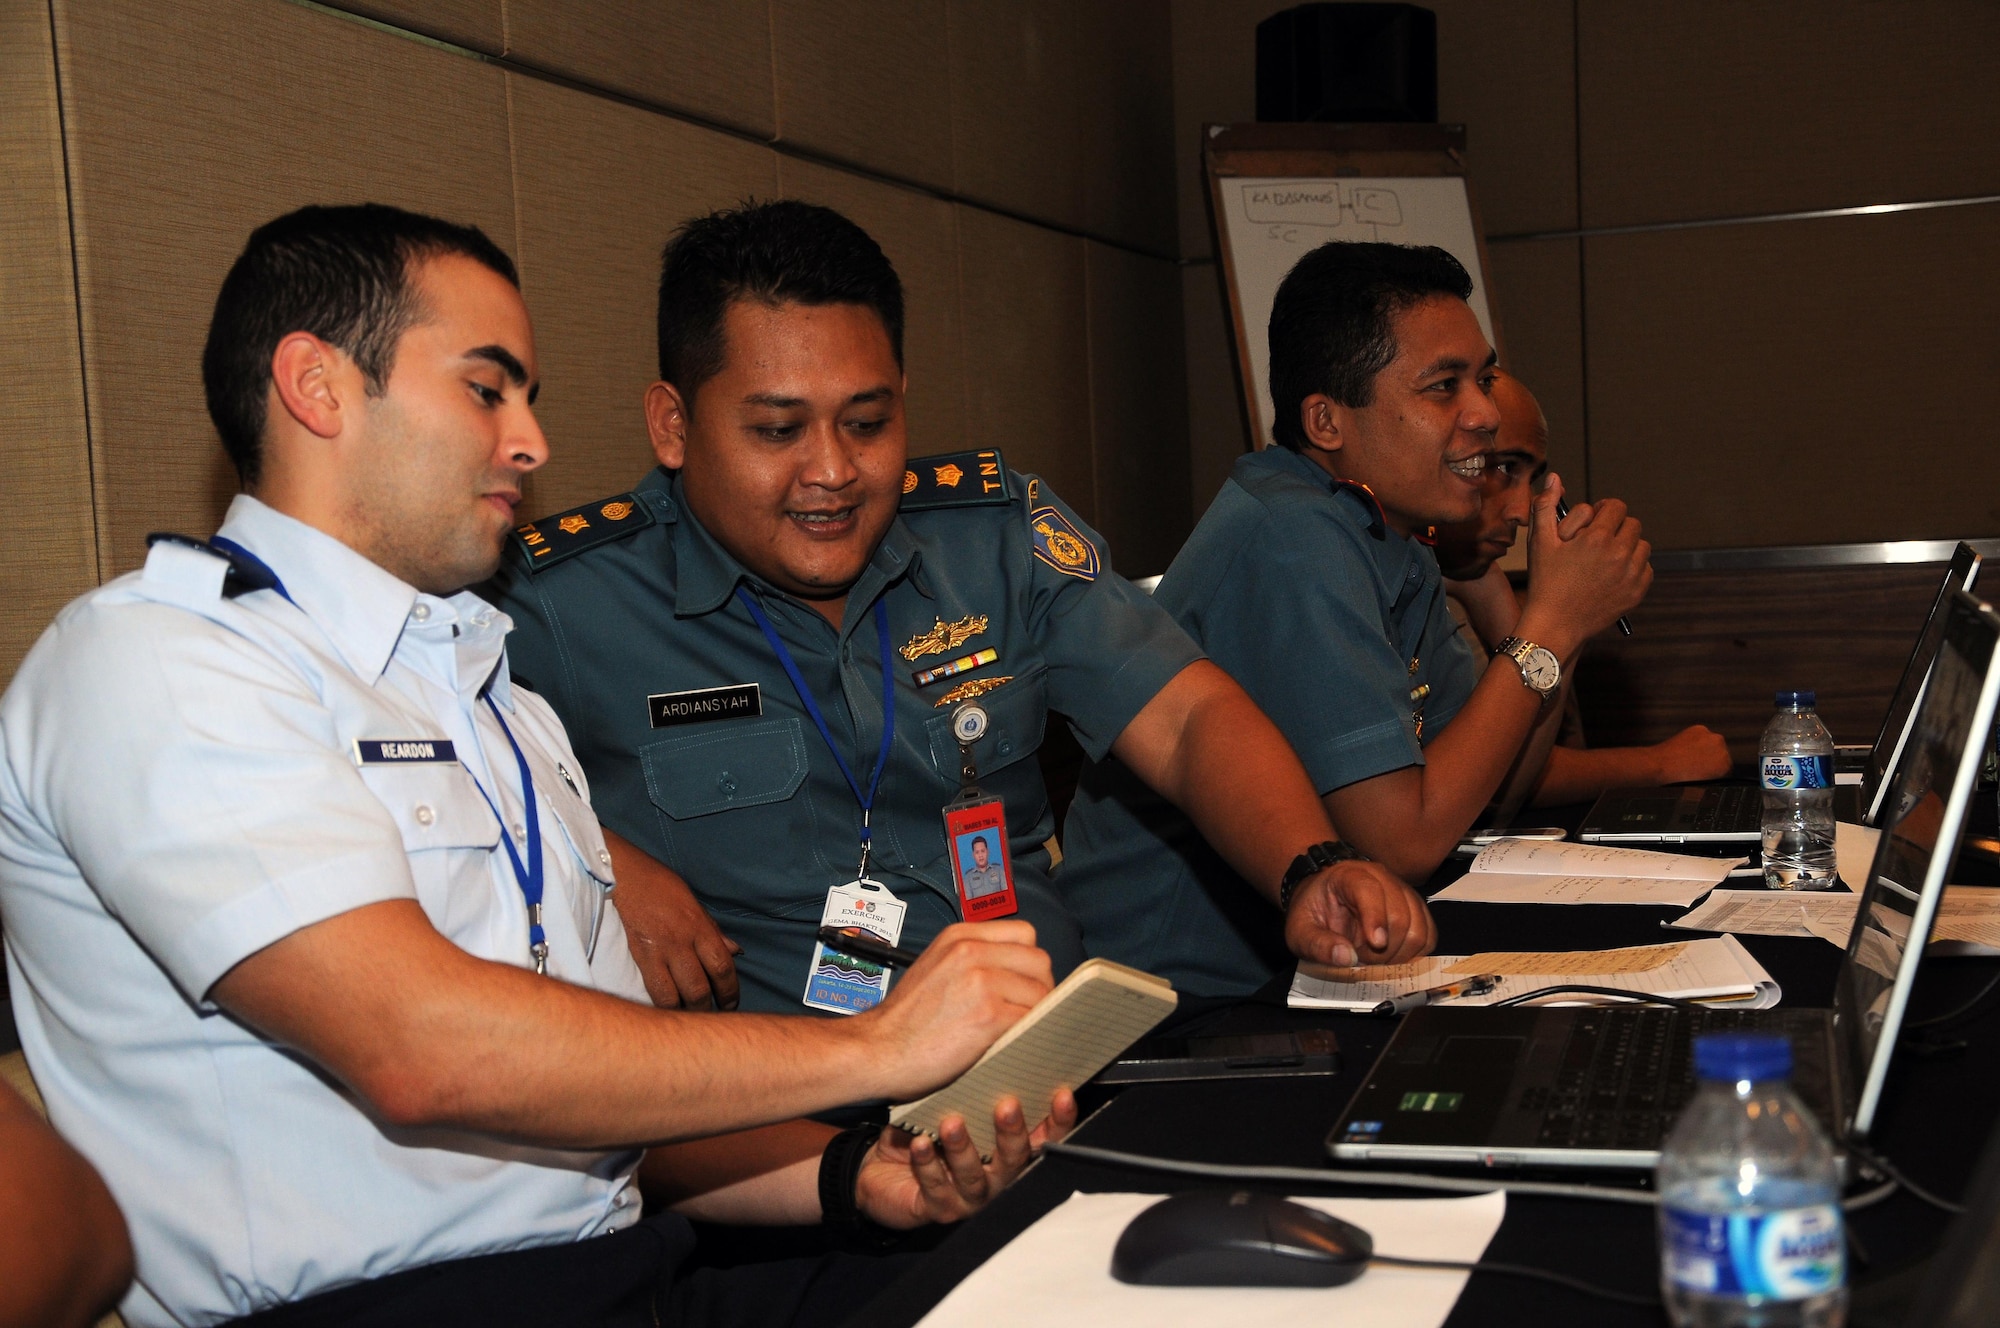 U.S. Air Force 1st Lt. Jeff Reardon, exercise logistics planner, and Tentara Nasional Indonesia Maj. Ardiansyah, logistics planner, discuss urban search and rescue considerations during exercise Gema Bhakti. Gema Bhakti, Indonesian for 'Echo of Good Deeds,' is a 10-day exercise designed to promote positive military relations, increase cultural awareness and enhance training and understanding of each other's capabilities. (U.S. Air Force photo by Capt. Joel Banjo-Johnson/Released)